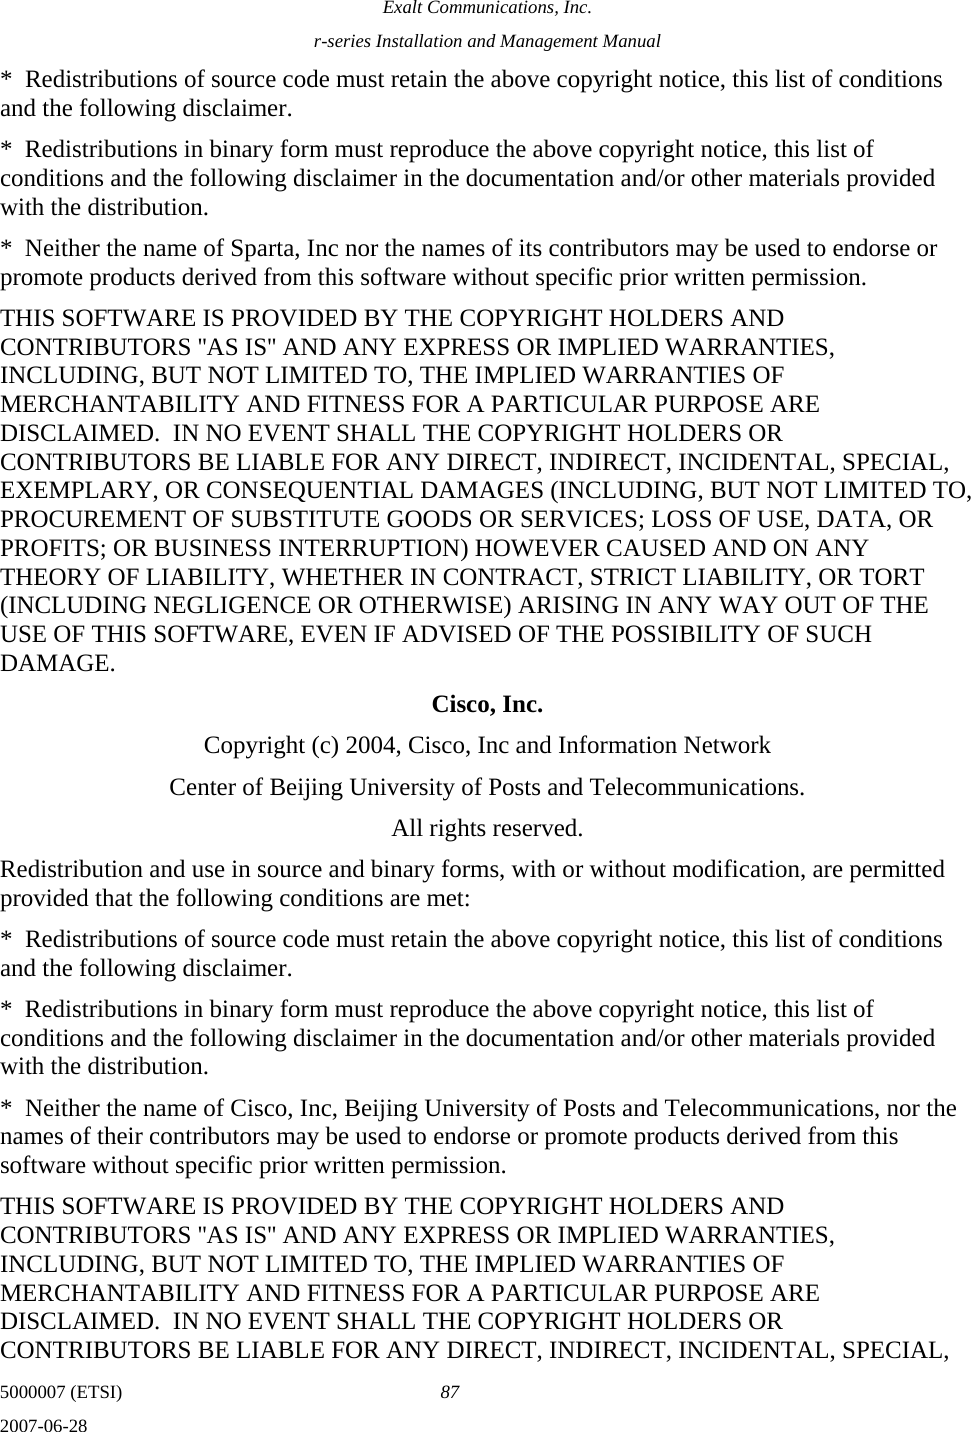 Exalt Communications, Inc. r-series Installation and Management Manual 5000007 (ETSI)  87 2007-06-28  *  Redistributions of source code must retain the above copyright notice, this list of conditions and the following disclaimer. *  Redistributions in binary form must reproduce the above copyright notice, this list of conditions and the following disclaimer in the documentation and/or other materials provided with the distribution. *  Neither the name of Sparta, Inc nor the names of its contributors may be used to endorse or promote products derived from this software without specific prior written permission. THIS SOFTWARE IS PROVIDED BY THE COPYRIGHT HOLDERS AND CONTRIBUTORS &apos;&apos;AS IS&apos;&apos; AND ANY EXPRESS OR IMPLIED WARRANTIES, INCLUDING, BUT NOT LIMITED TO, THE IMPLIED WARRANTIES OF MERCHANTABILITY AND FITNESS FOR A PARTICULAR PURPOSE ARE DISCLAIMED.  IN NO EVENT SHALL THE COPYRIGHT HOLDERS OR CONTRIBUTORS BE LIABLE FOR ANY DIRECT, INDIRECT, INCIDENTAL, SPECIAL, EXEMPLARY, OR CONSEQUENTIAL DAMAGES (INCLUDING, BUT NOT LIMITED TO, PROCUREMENT OF SUBSTITUTE GOODS OR SERVICES; LOSS OF USE, DATA, OR PROFITS; OR BUSINESS INTERRUPTION) HOWEVER CAUSED AND ON ANY THEORY OF LIABILITY, WHETHER IN CONTRACT, STRICT LIABILITY, OR TORT (INCLUDING NEGLIGENCE OR OTHERWISE) ARISING IN ANY WAY OUT OF THE USE OF THIS SOFTWARE, EVEN IF ADVISED OF THE POSSIBILITY OF SUCH DAMAGE. Cisco, Inc. Copyright (c) 2004, Cisco, Inc and Information Network Center of Beijing University of Posts and Telecommunications. All rights reserved. Redistribution and use in source and binary forms, with or without modification, are permitted provided that the following conditions are met: *  Redistributions of source code must retain the above copyright notice, this list of conditions and the following disclaimer. *  Redistributions in binary form must reproduce the above copyright notice, this list of conditions and the following disclaimer in the documentation and/or other materials provided with the distribution. *  Neither the name of Cisco, Inc, Beijing University of Posts and Telecommunications, nor the names of their contributors may be used to endorse or promote products derived from this software without specific prior written permission. THIS SOFTWARE IS PROVIDED BY THE COPYRIGHT HOLDERS AND CONTRIBUTORS &apos;&apos;AS IS&apos;&apos; AND ANY EXPRESS OR IMPLIED WARRANTIES, INCLUDING, BUT NOT LIMITED TO, THE IMPLIED WARRANTIES OF MERCHANTABILITY AND FITNESS FOR A PARTICULAR PURPOSE ARE DISCLAIMED.  IN NO EVENT SHALL THE COPYRIGHT HOLDERS OR CONTRIBUTORS BE LIABLE FOR ANY DIRECT, INDIRECT, INCIDENTAL, SPECIAL, 